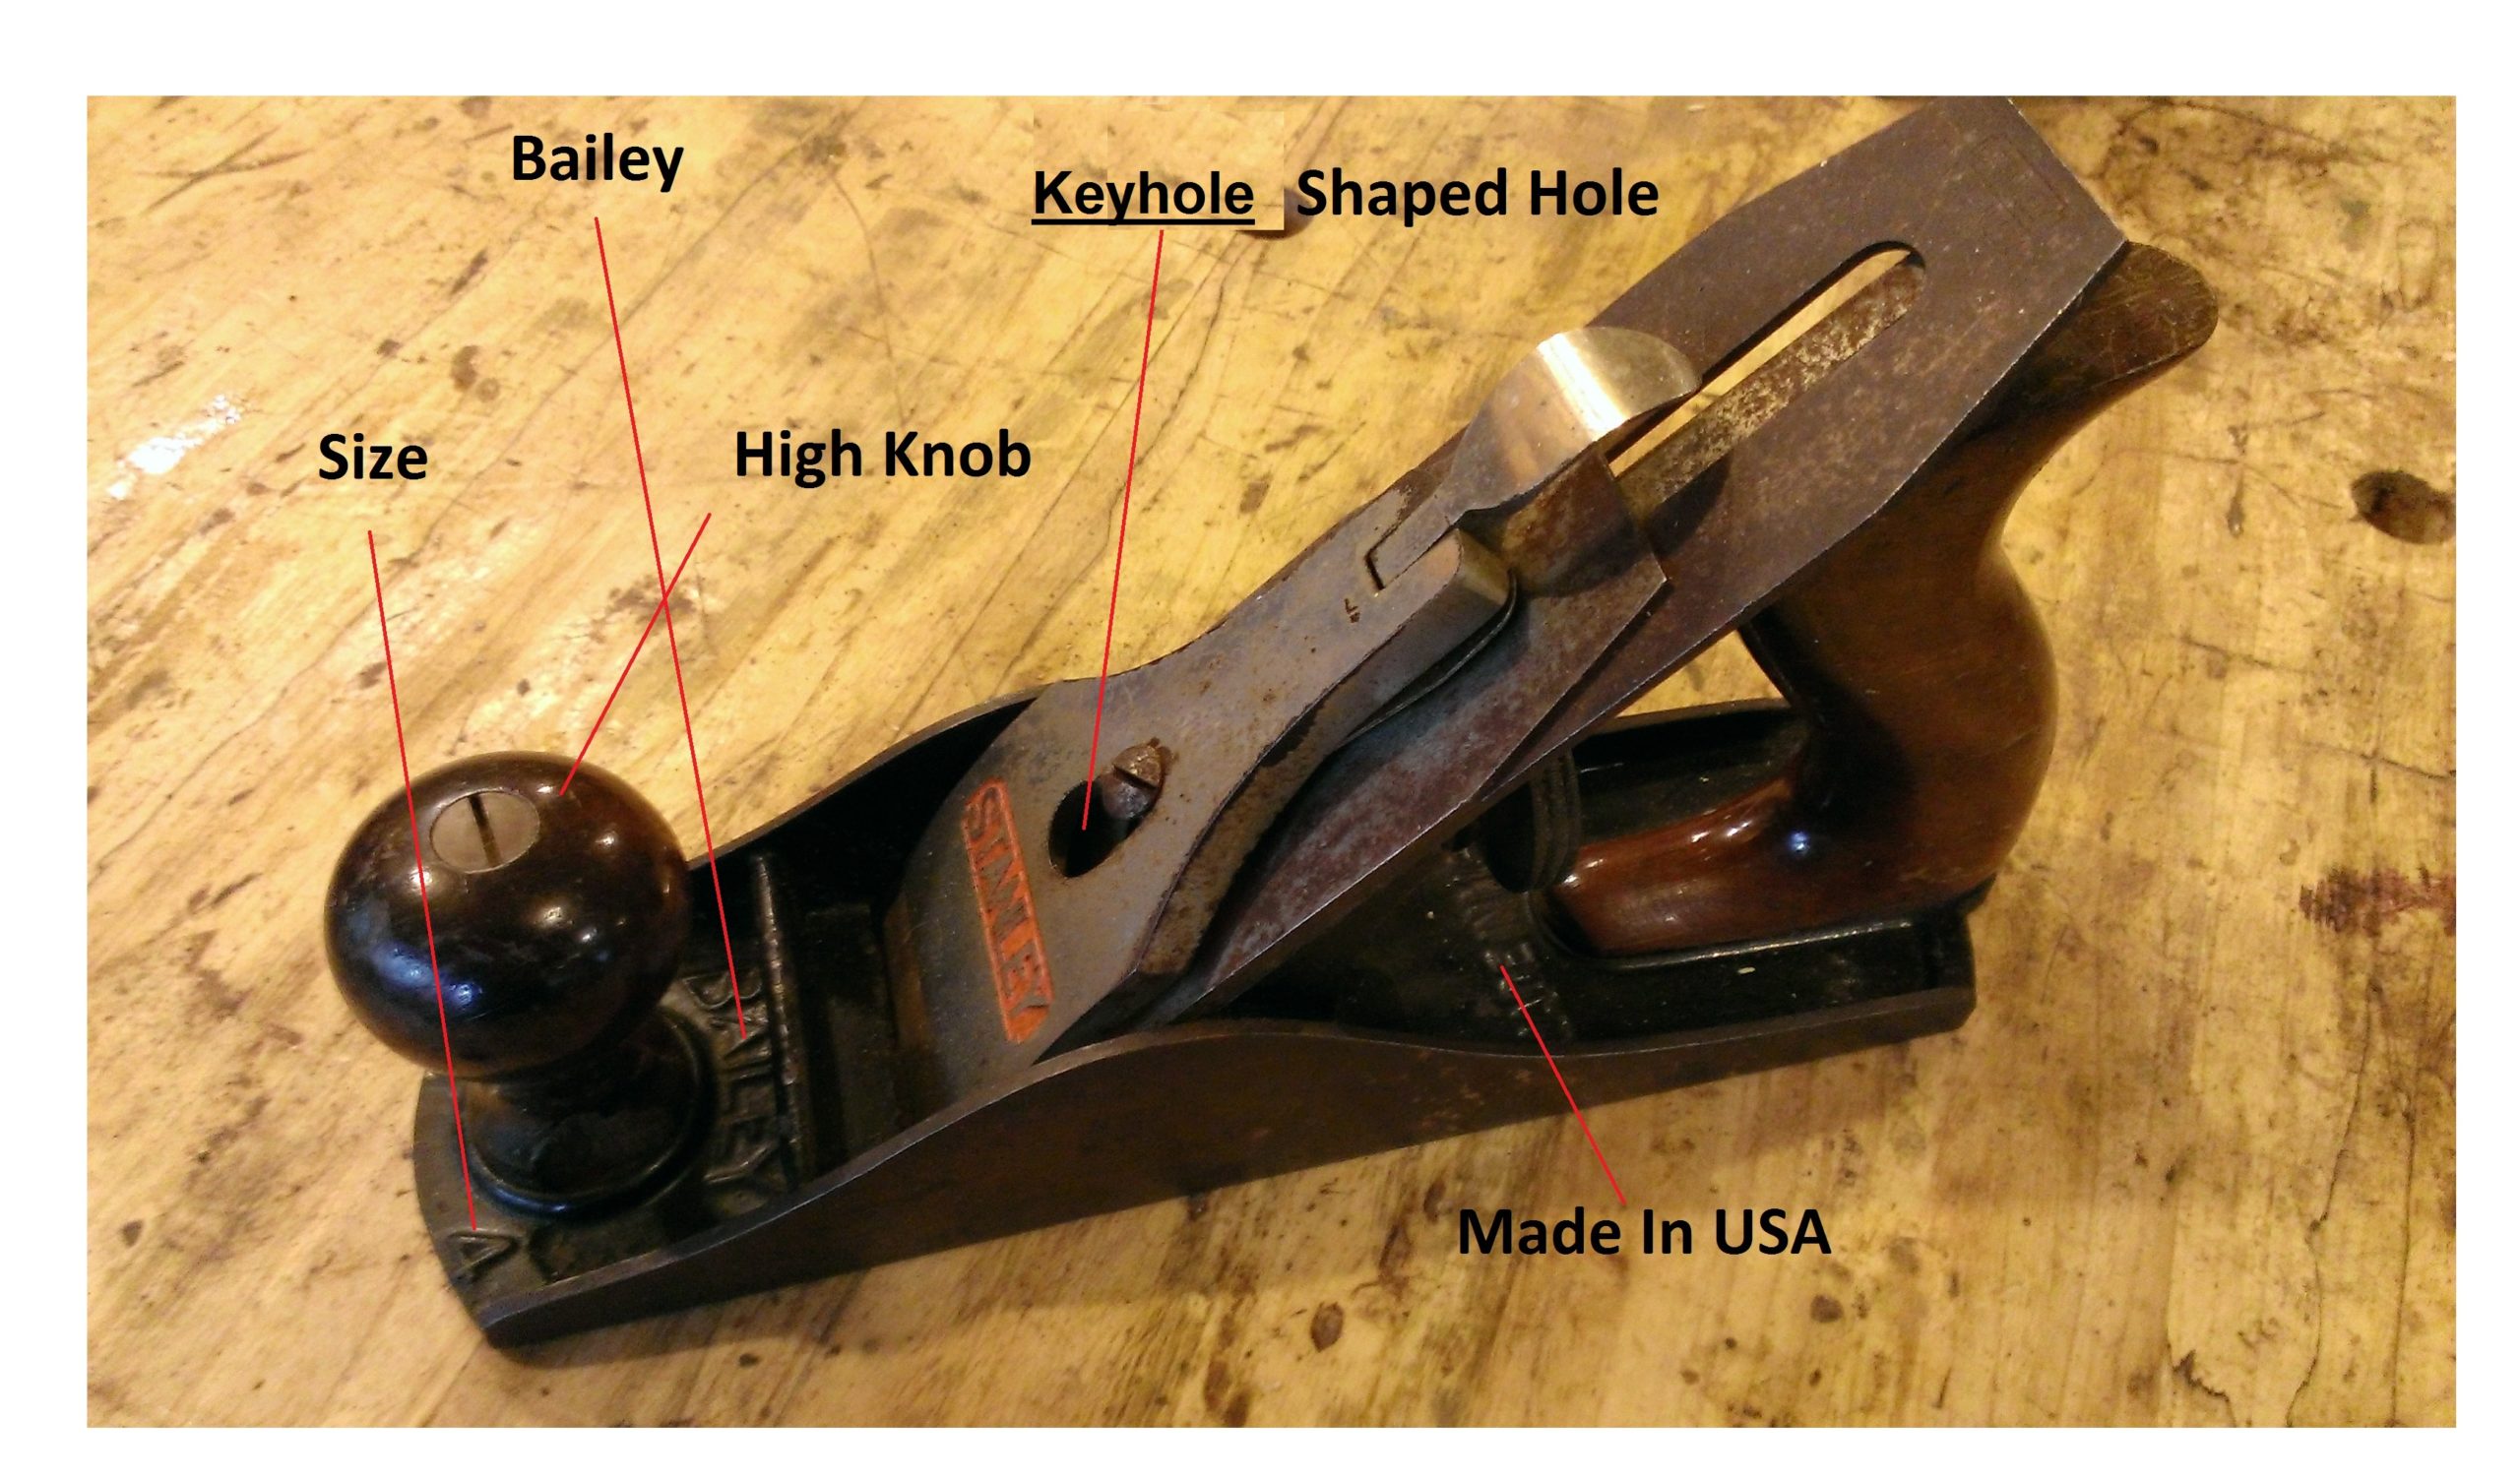 How do you date a stanley bailey plane?